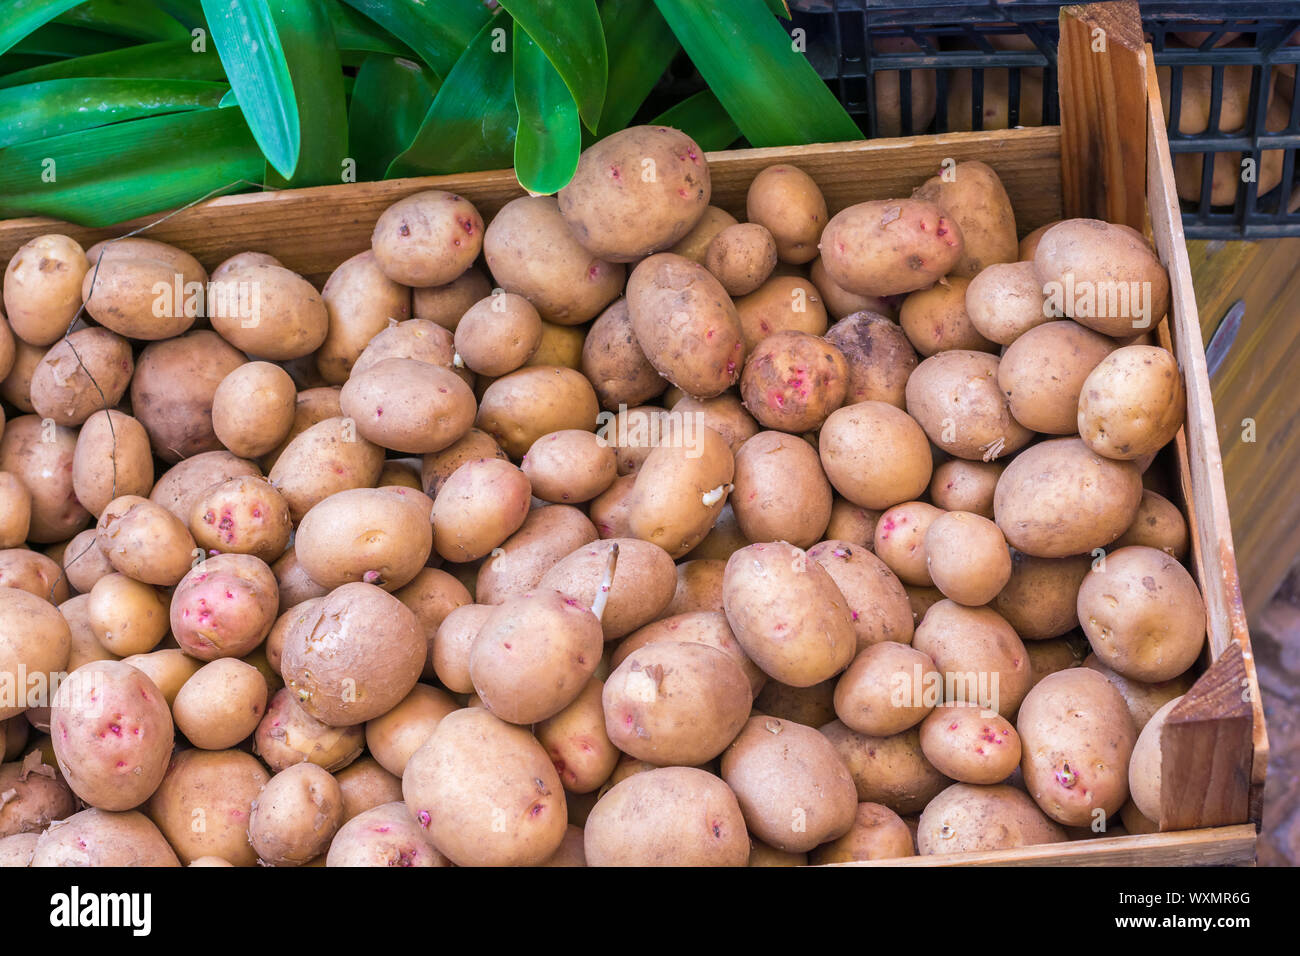 Fresh potatoes at the market stall of a greengrocer Stock Photo